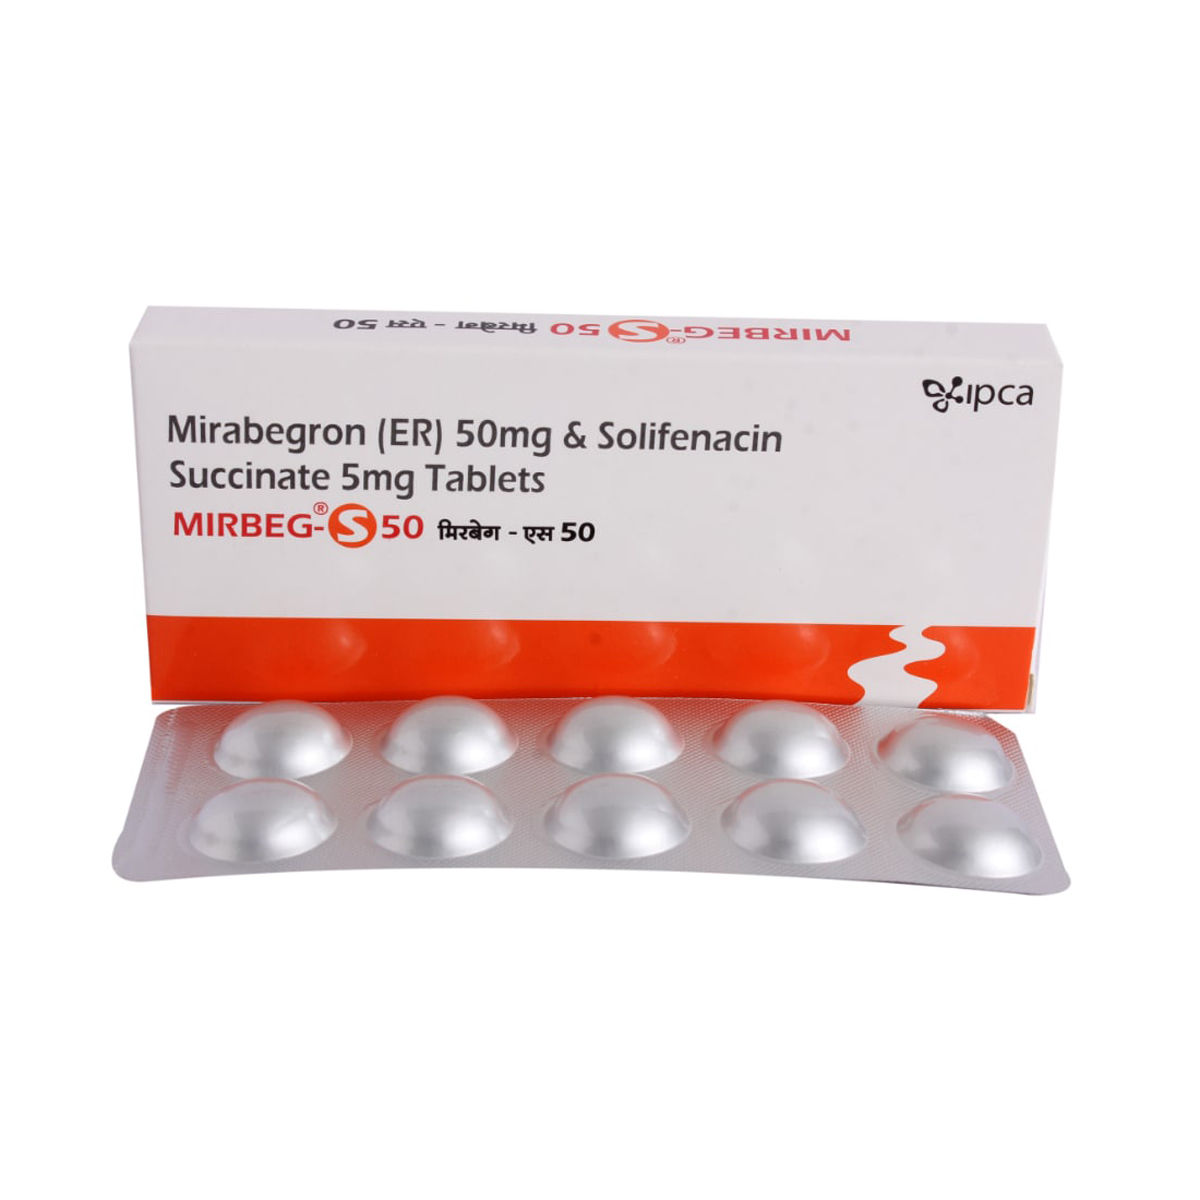 Mirbeg-S 50 Tablet 10's, Pack of 10 TABLETS